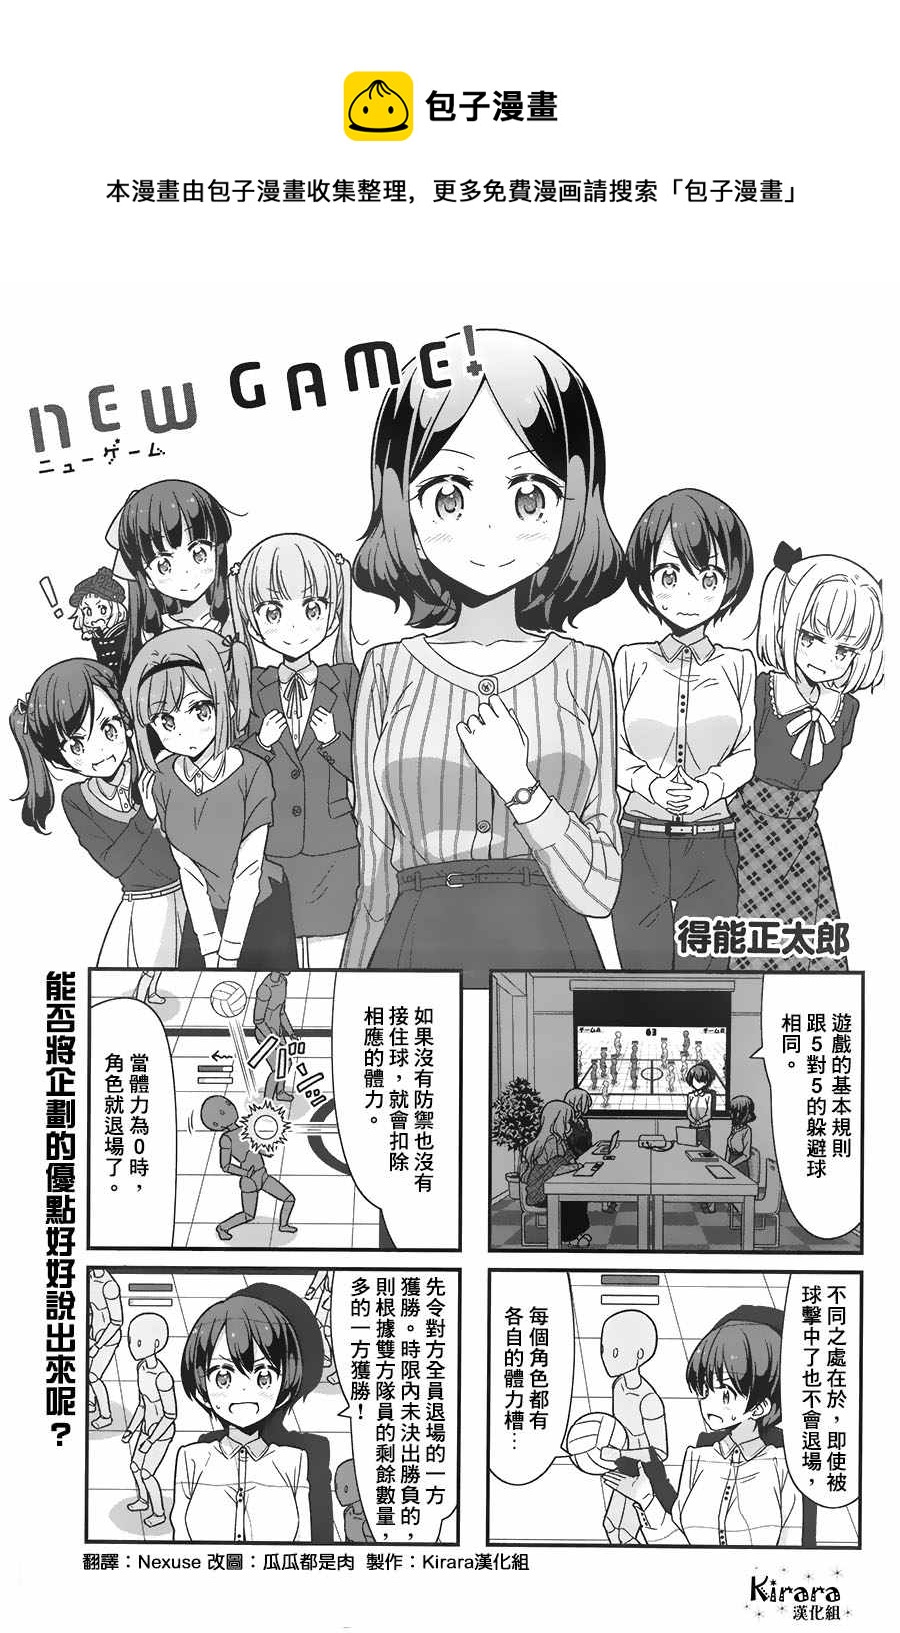 NEW GAME! - 76 第76話 - 1